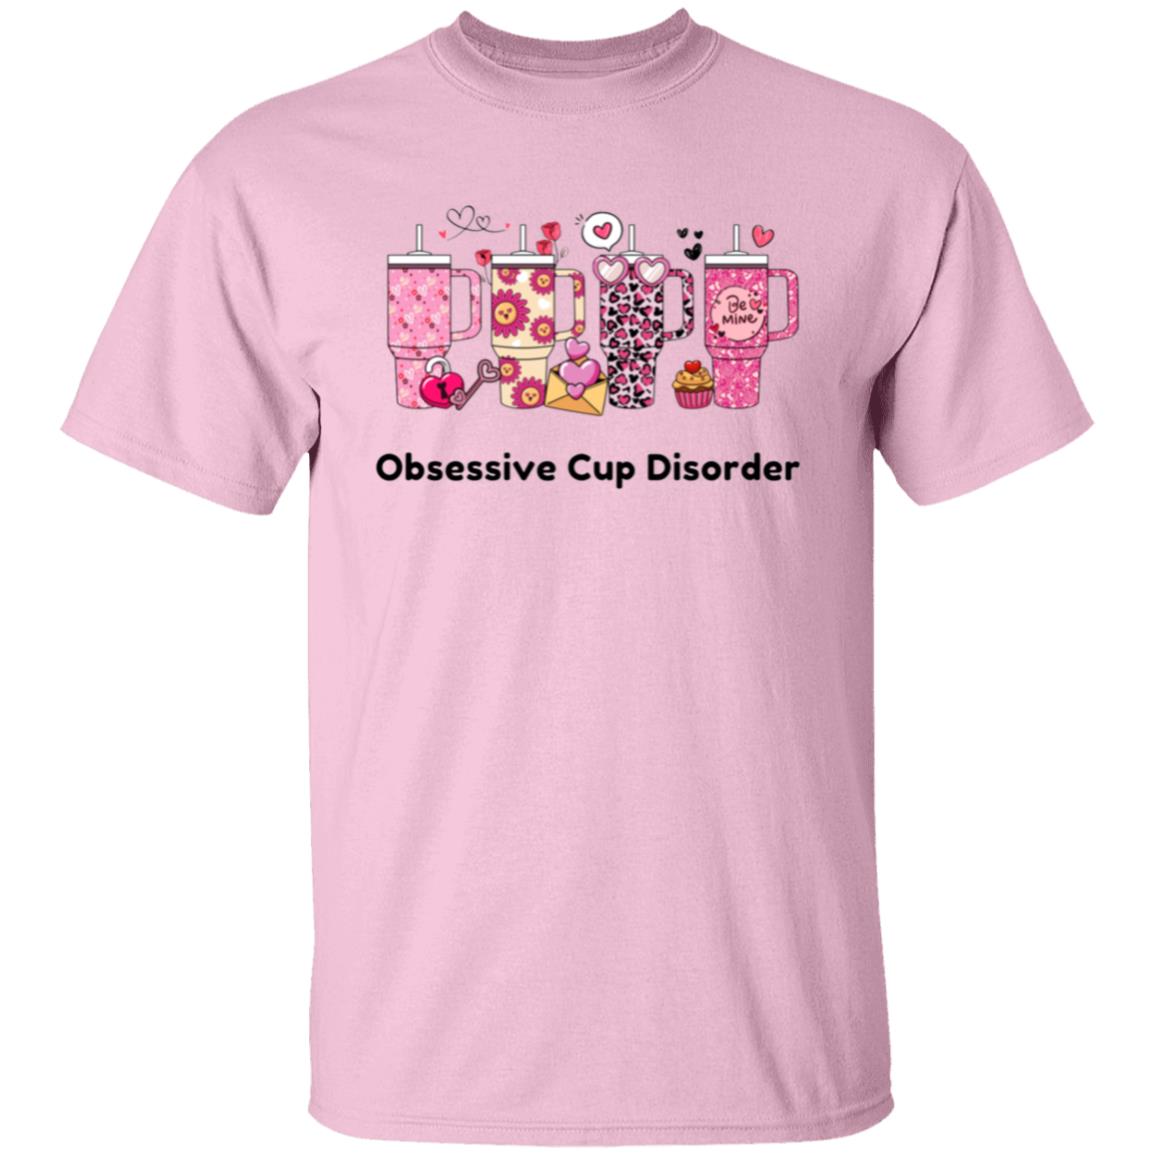 Obsessive Cup Disorder T-Shirt